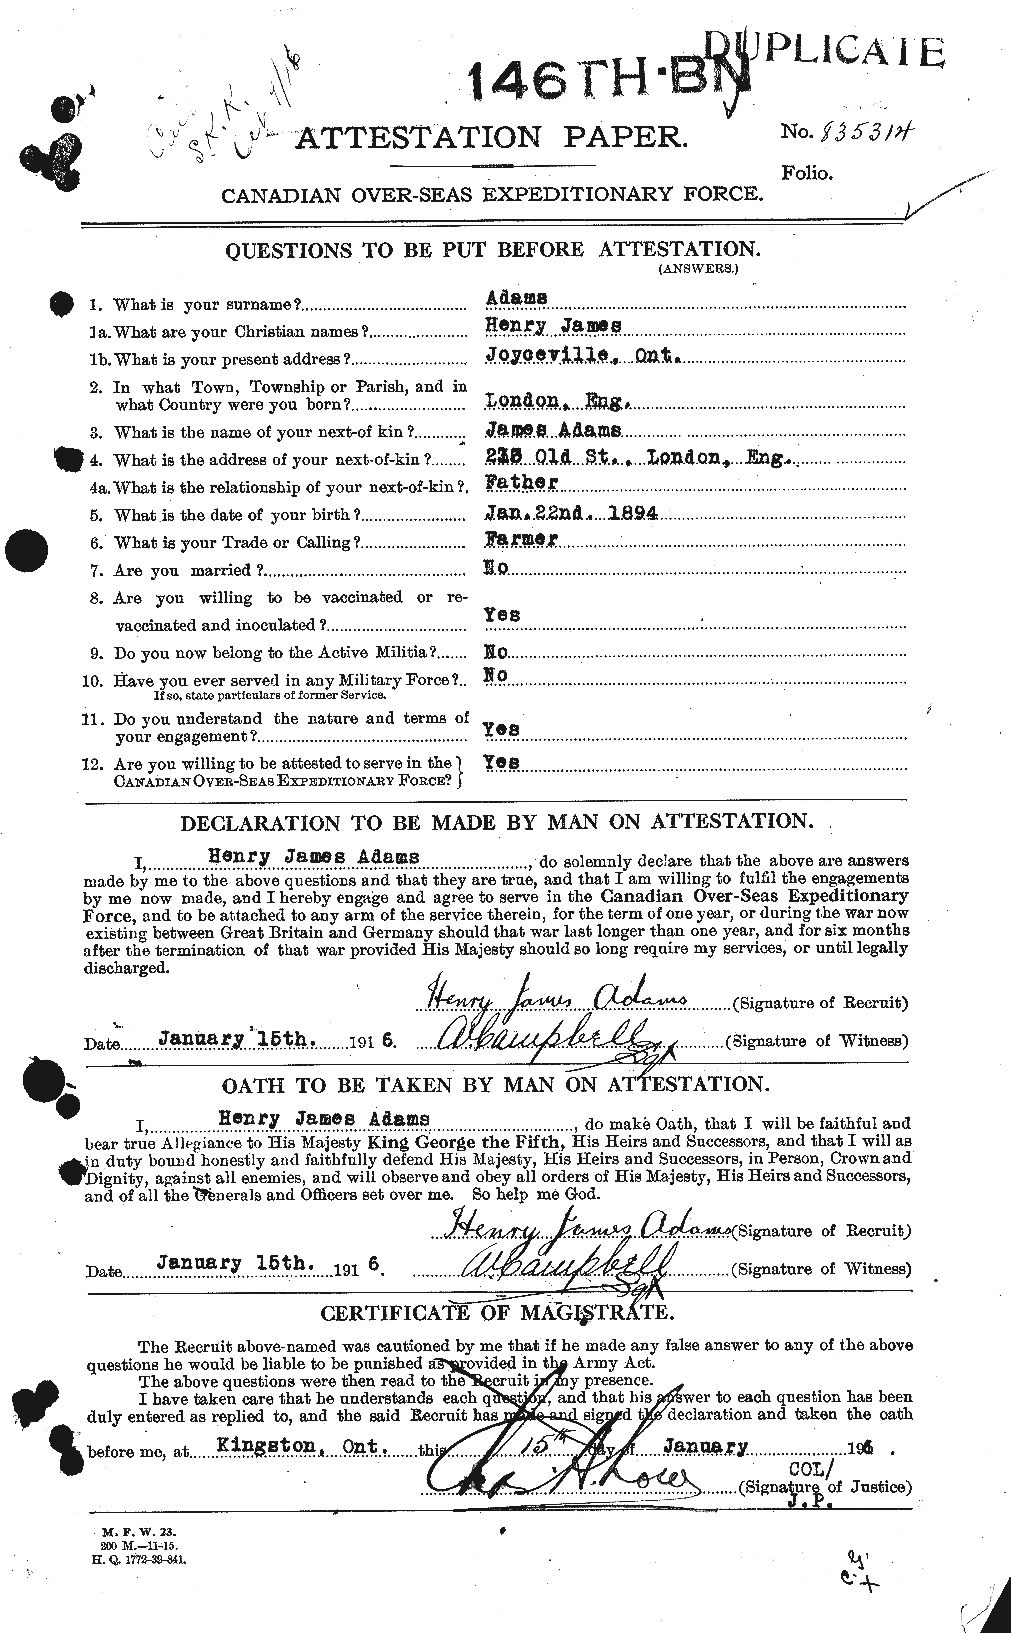 Personnel Records of the First World War - CEF 203189a